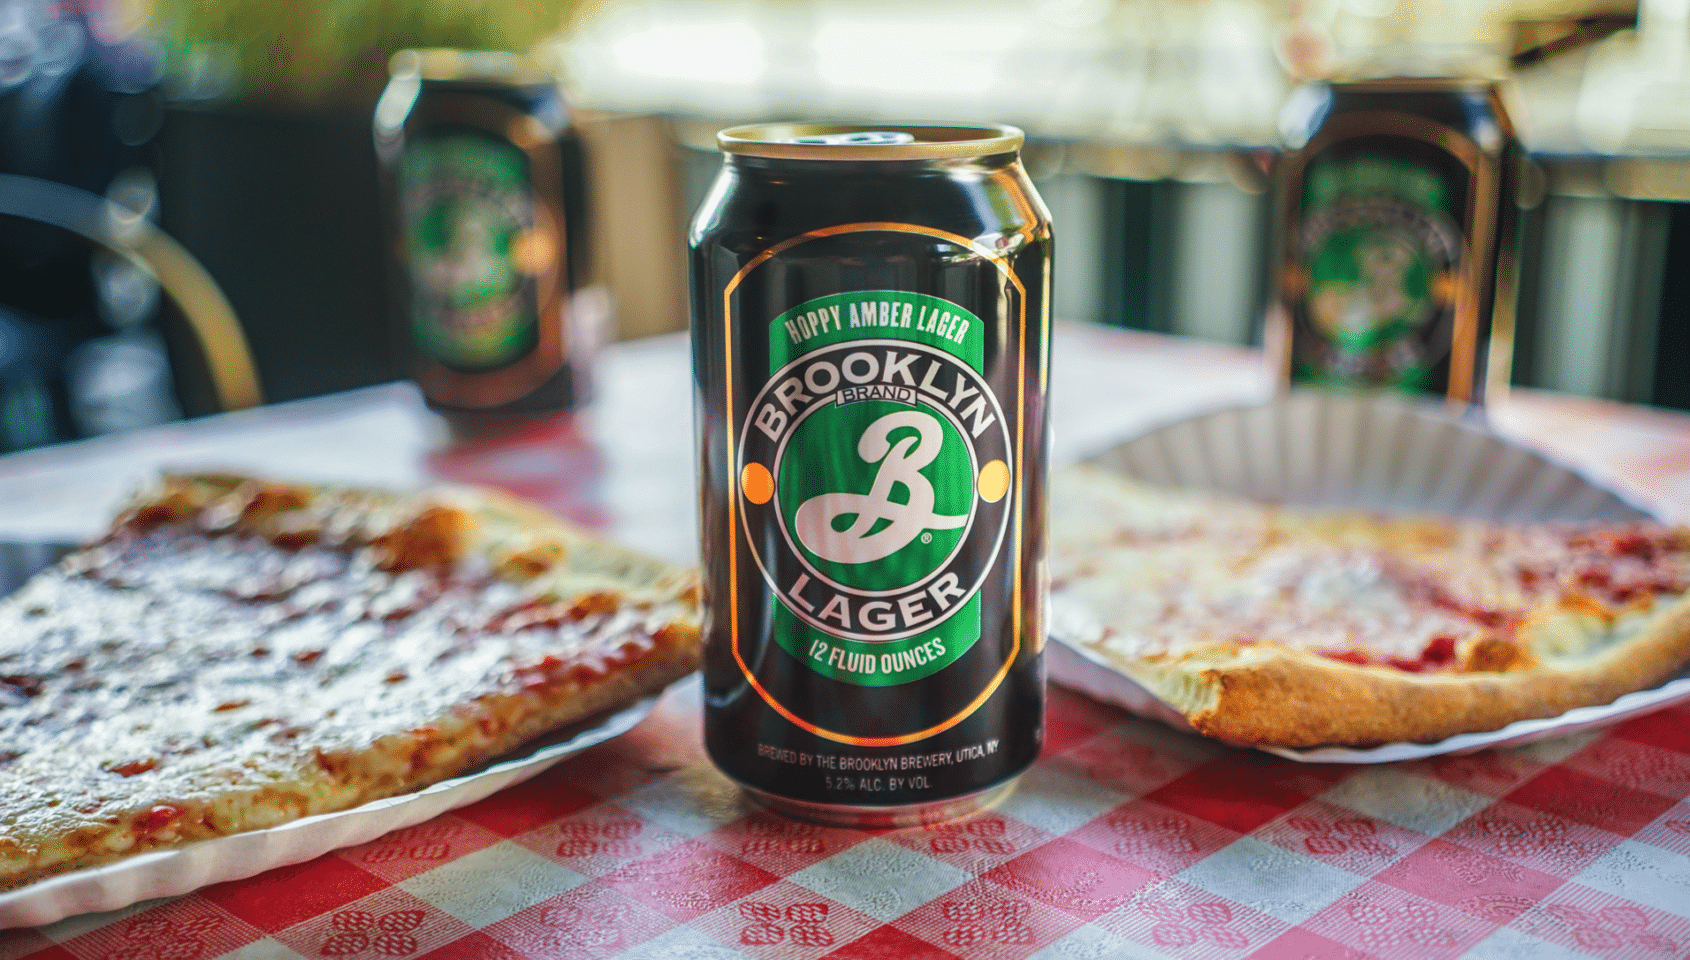 brooklyn lager tour